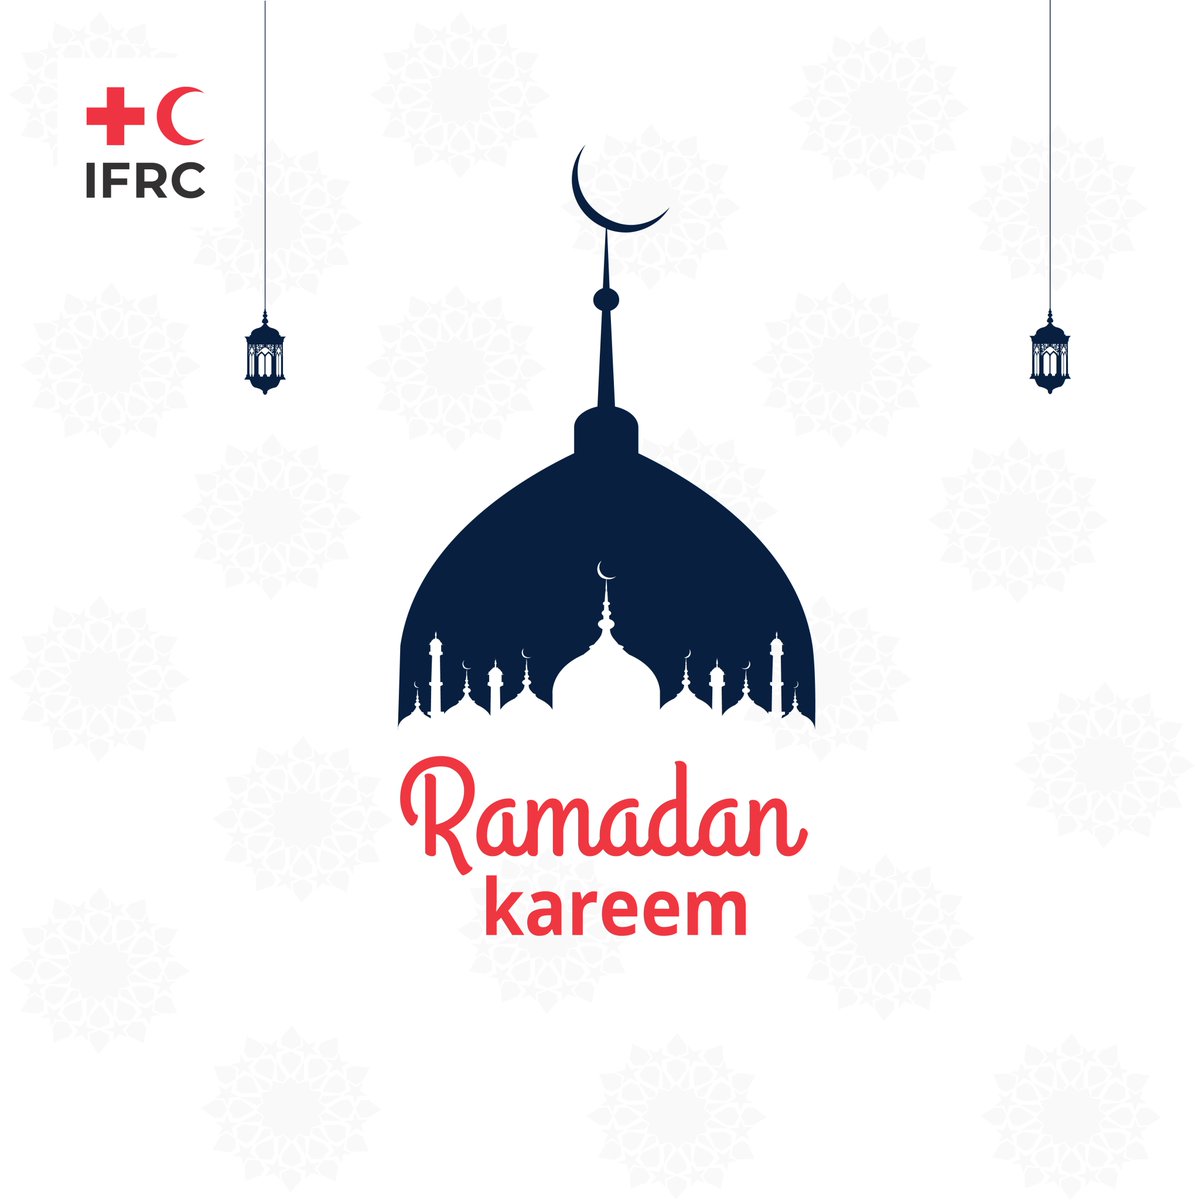 As Ramadan begins, the IFRC extends its best wishes to all those celebrating. May this holy month bring you peace and blessings. #RamadanKareem